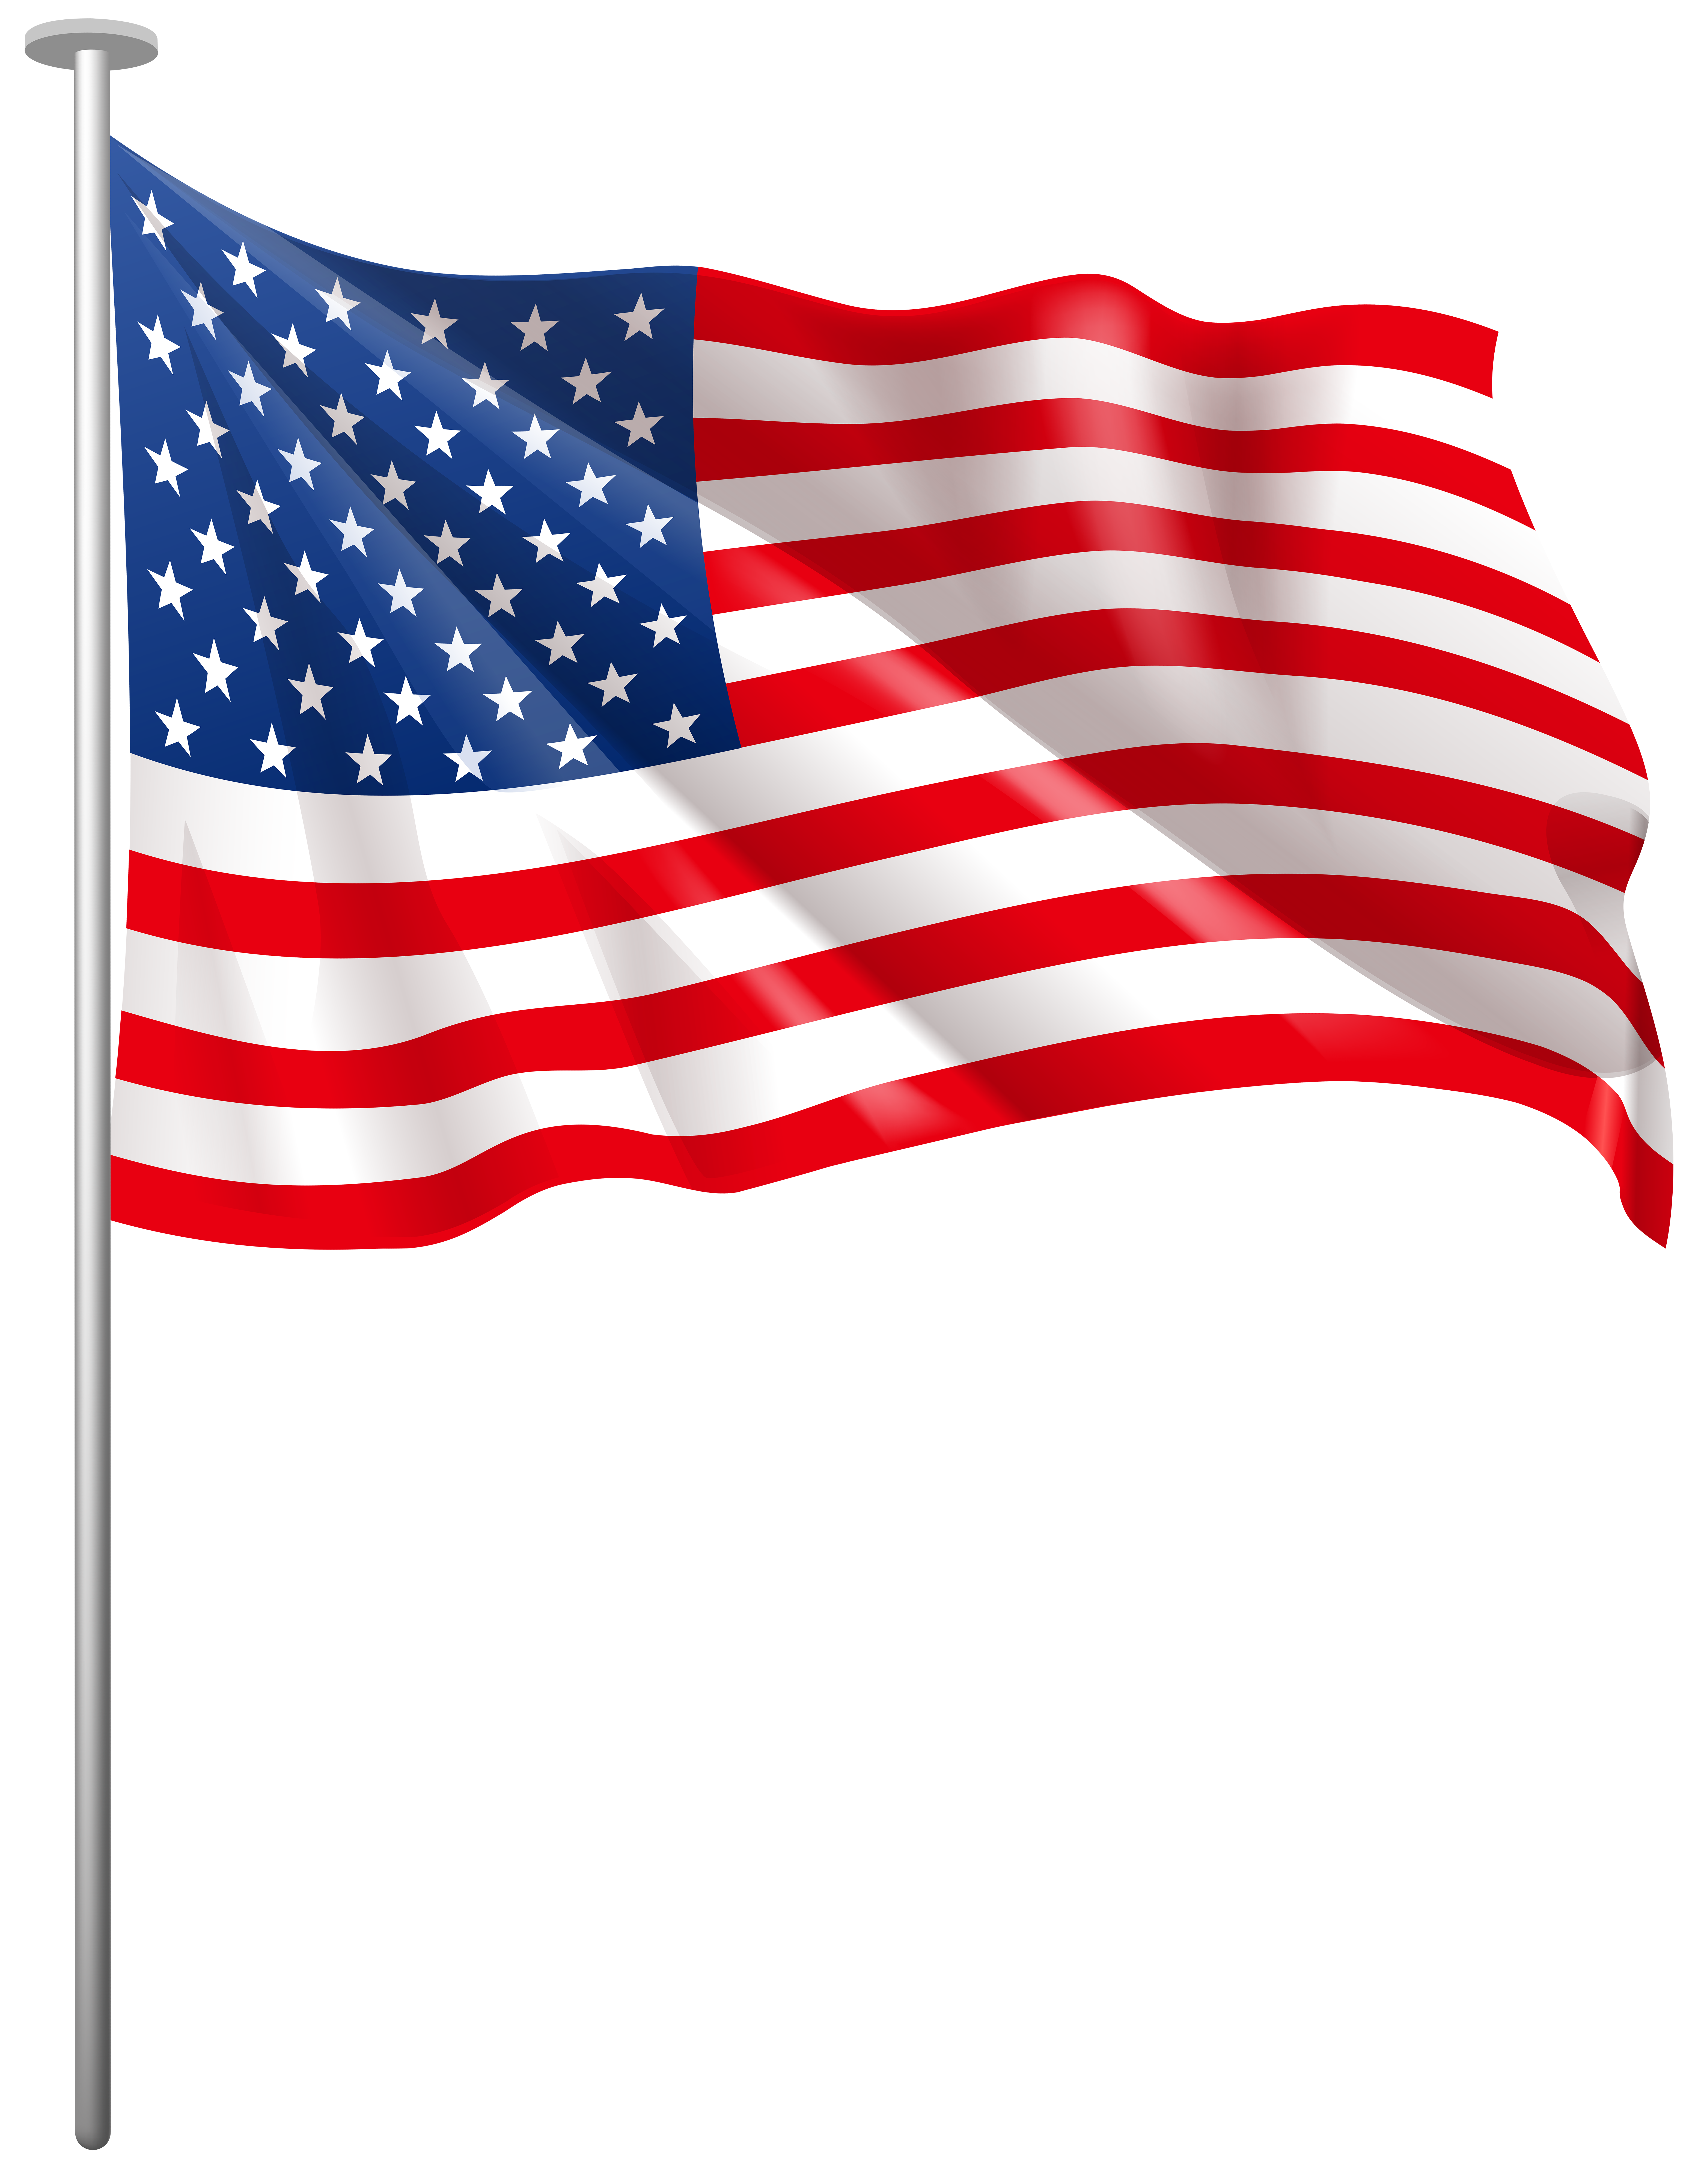 Flag of the United States Scalable Vector Graphics Clip art.